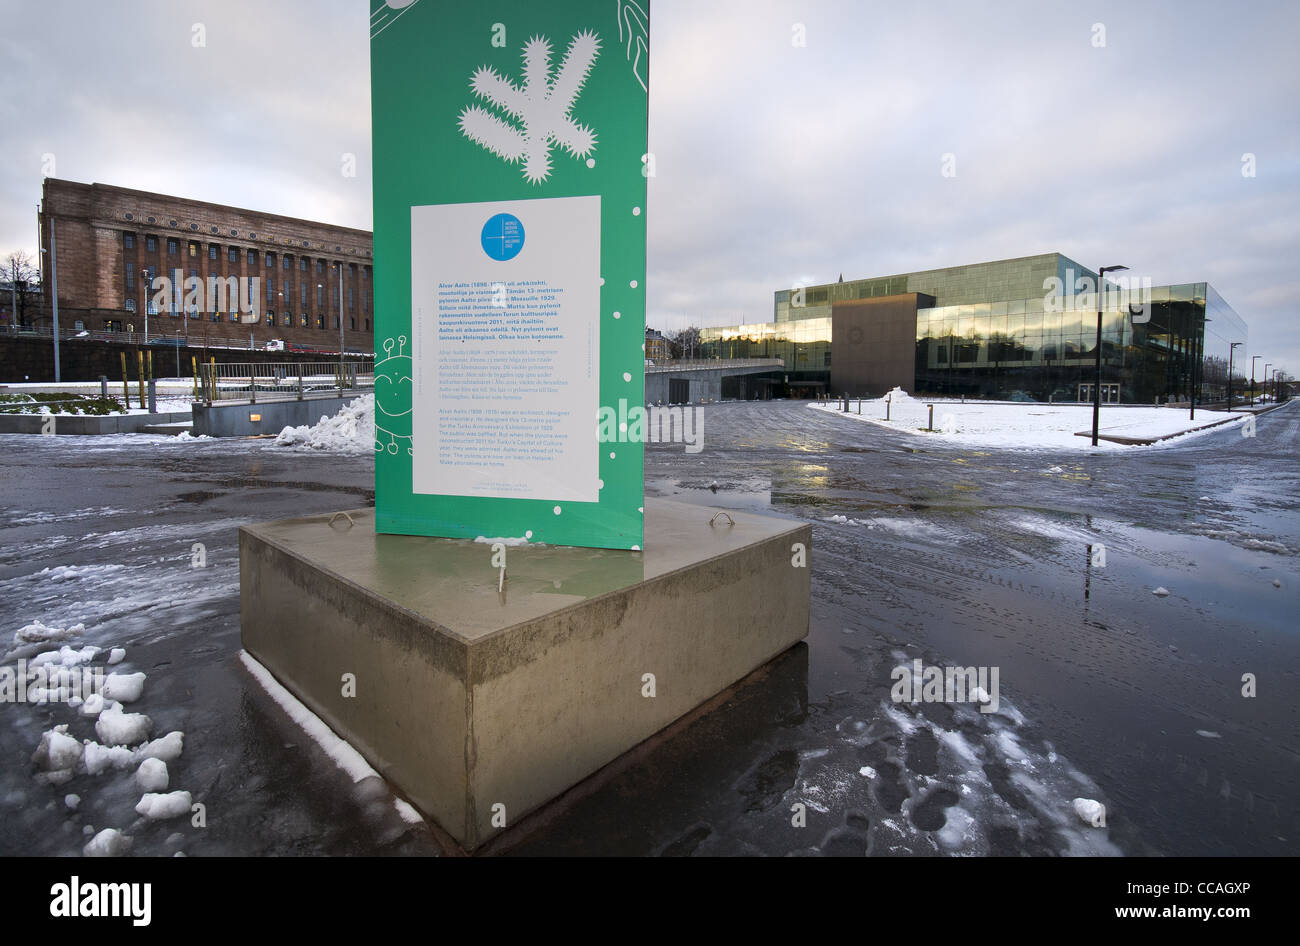 Information board on the Finnish Architect Alvar Aalto in front of Parliament House and the Helsinki Music Centre Helsinki 2012 Stock Photo